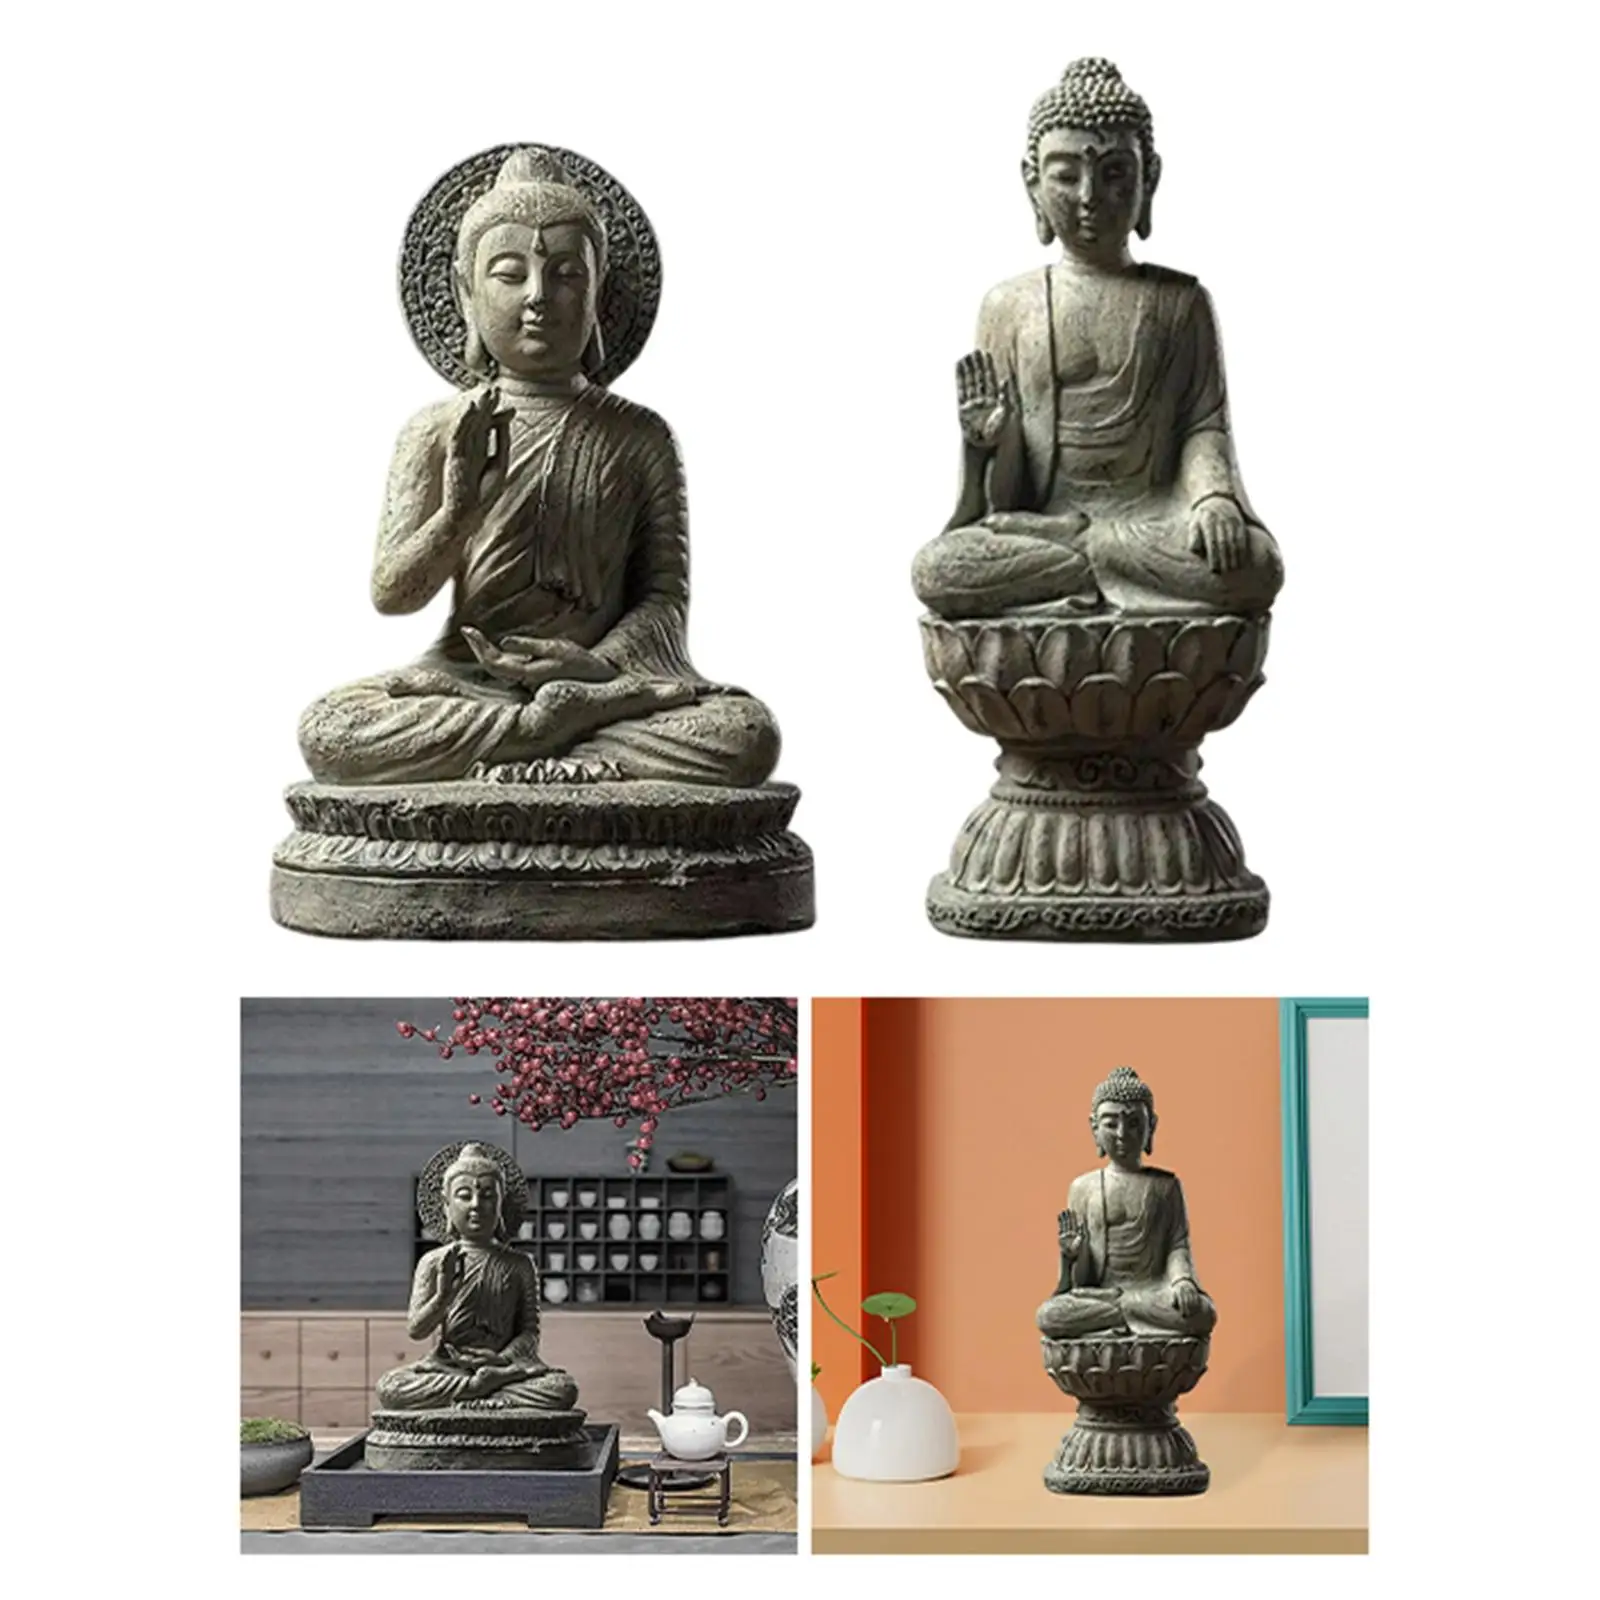 Sitting Meditating Buddha Statue Figurine Enlightened One Sculpture Fengshui Restorative Gift Small for Tabletop Office Decor